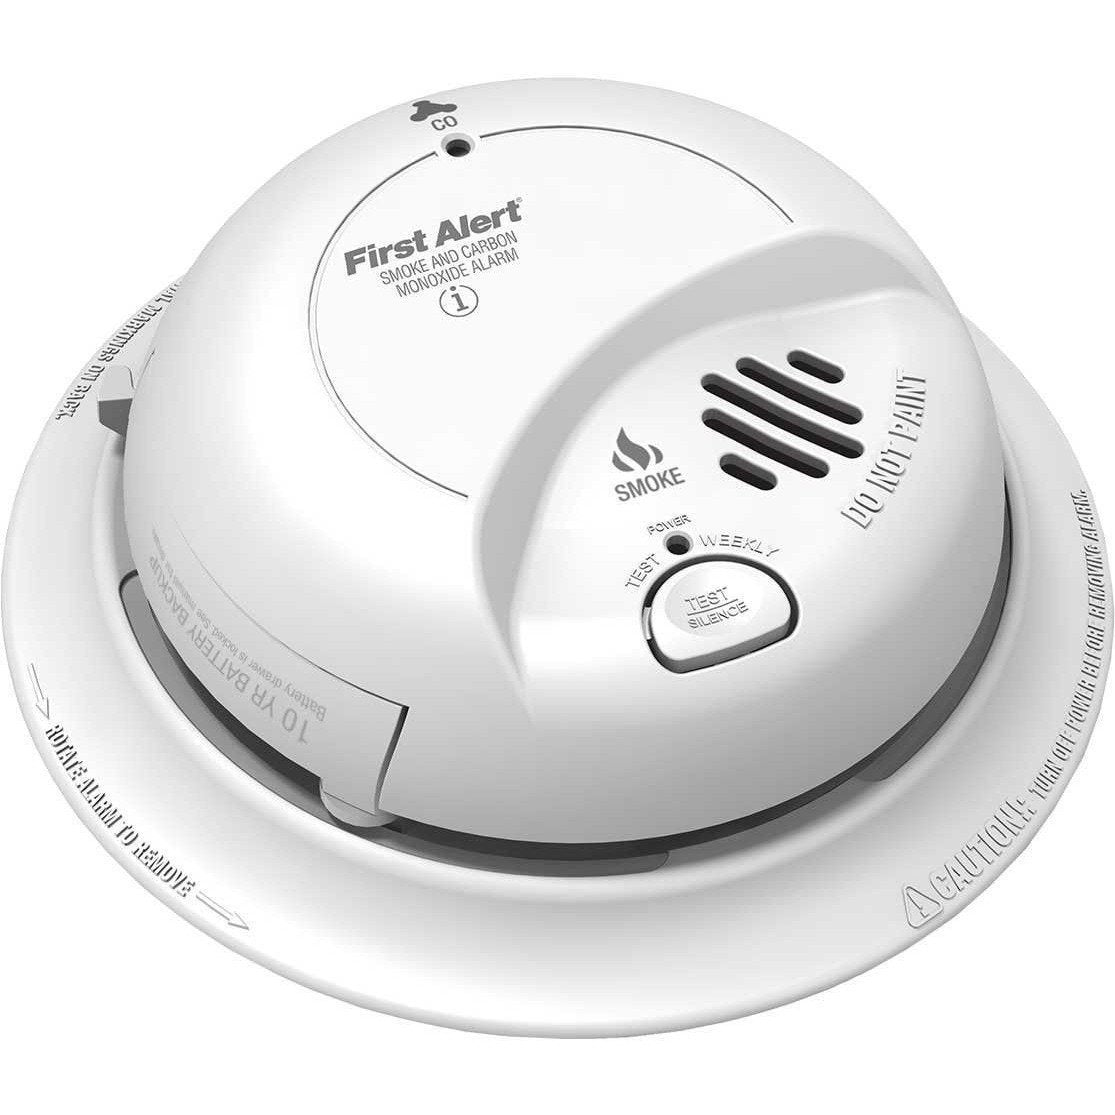 First Alert 10-Year Battery-Operated Carbon Monoxide Detector in